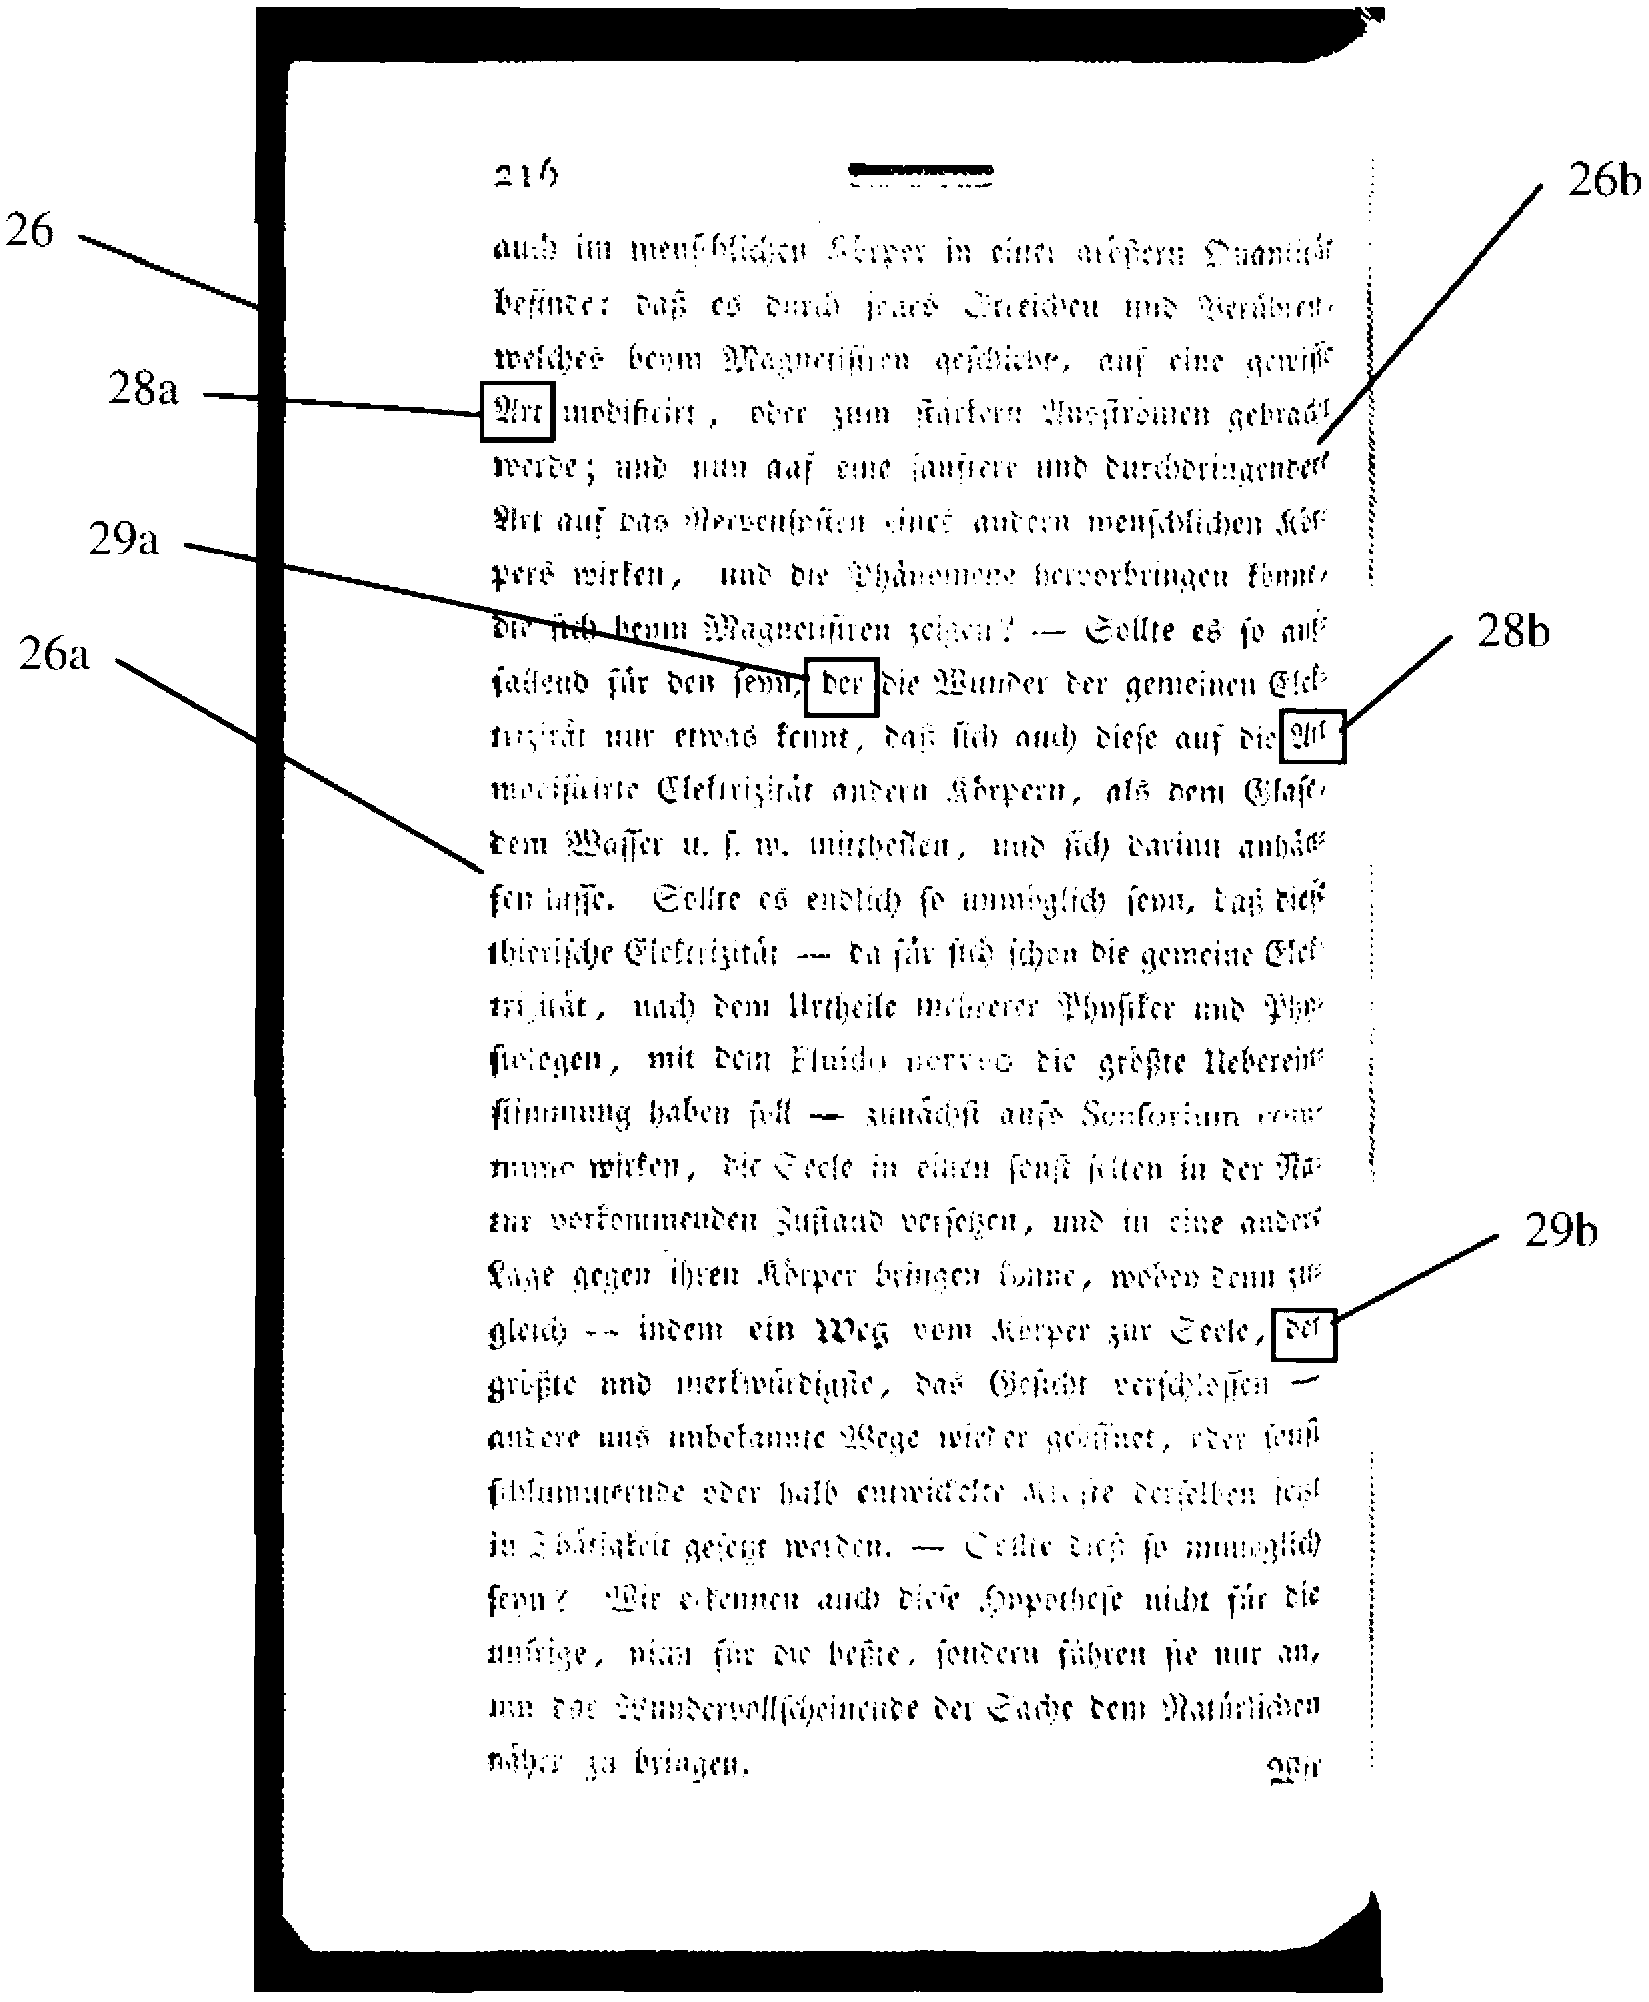 Correcting page curl in scanned books